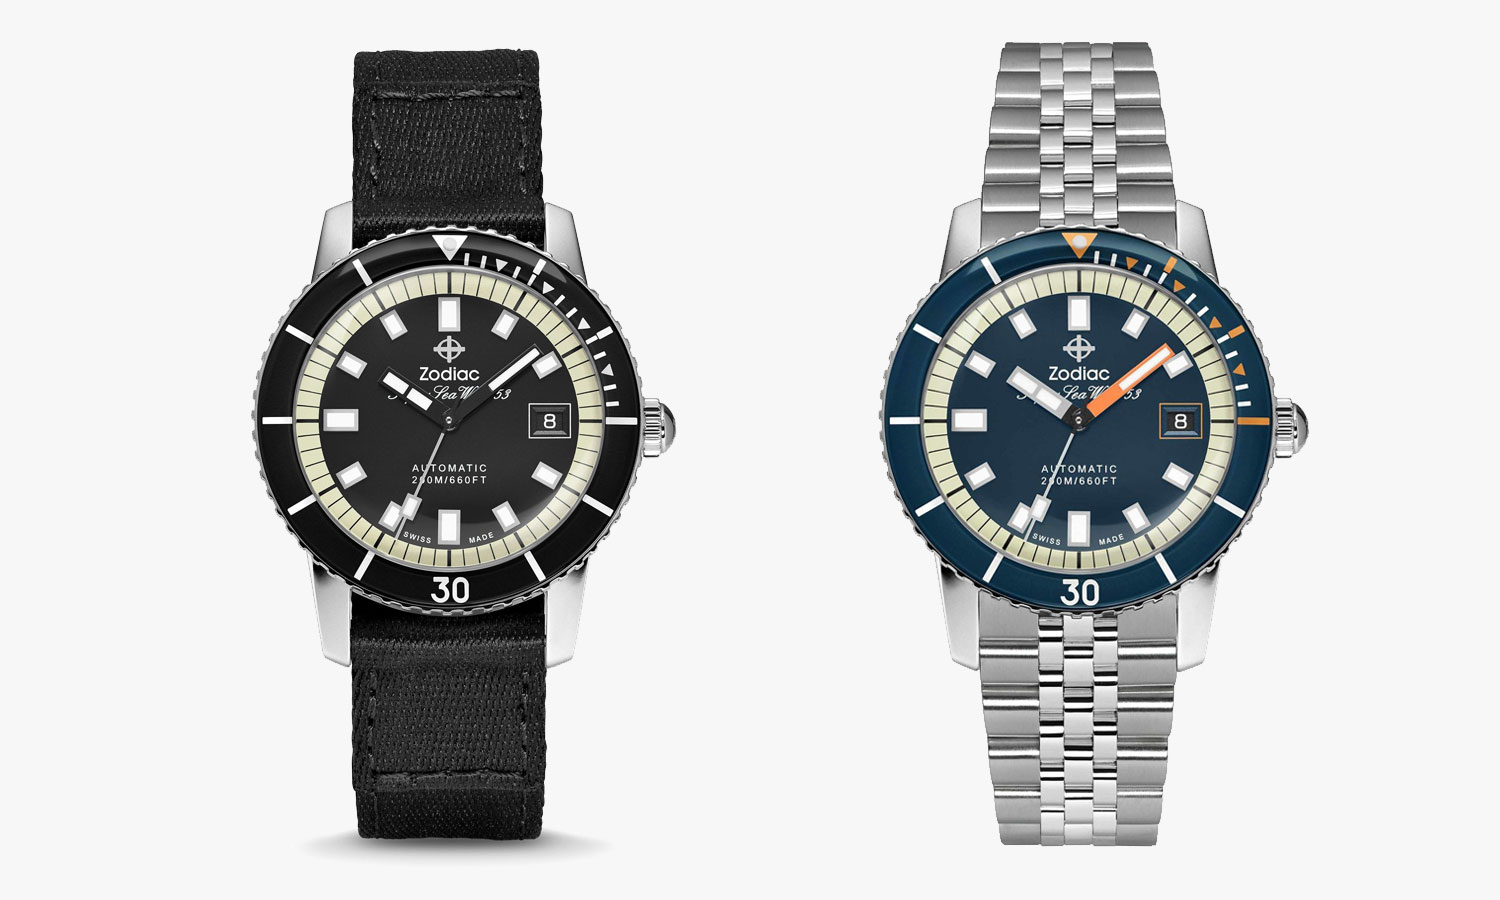 Zodiac’s Retro Dive-Watch is Colored for Summer